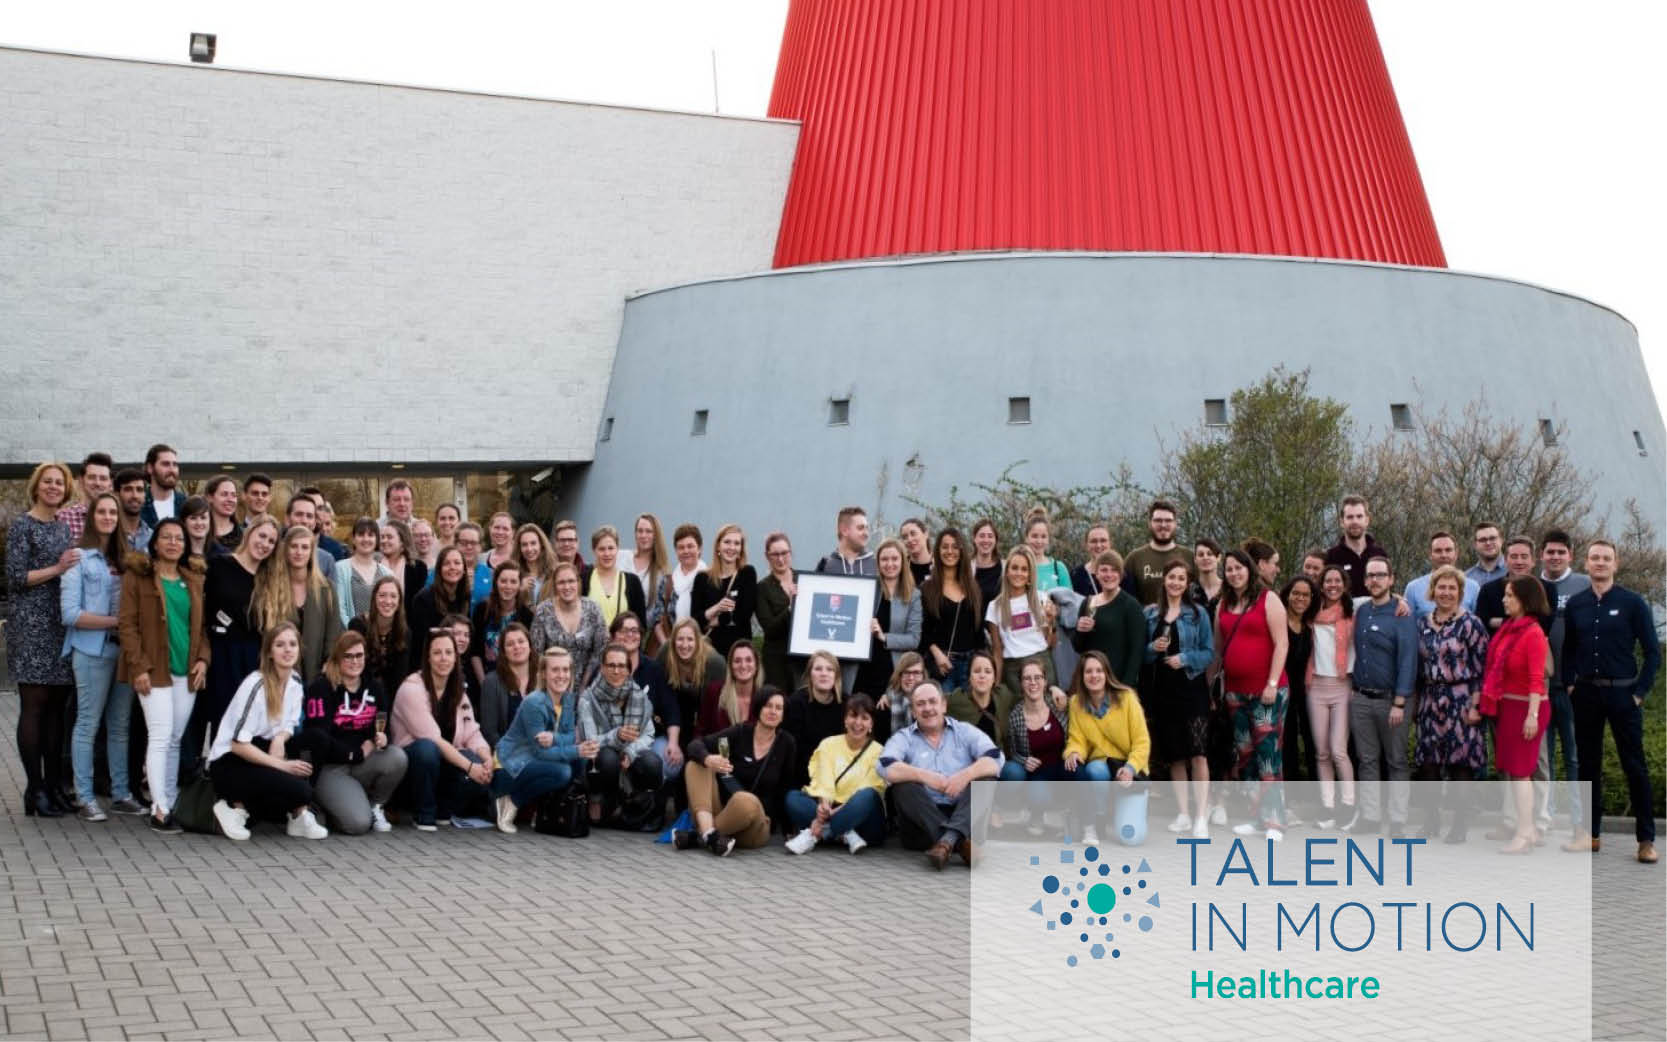 Talent in Motion Healthcare